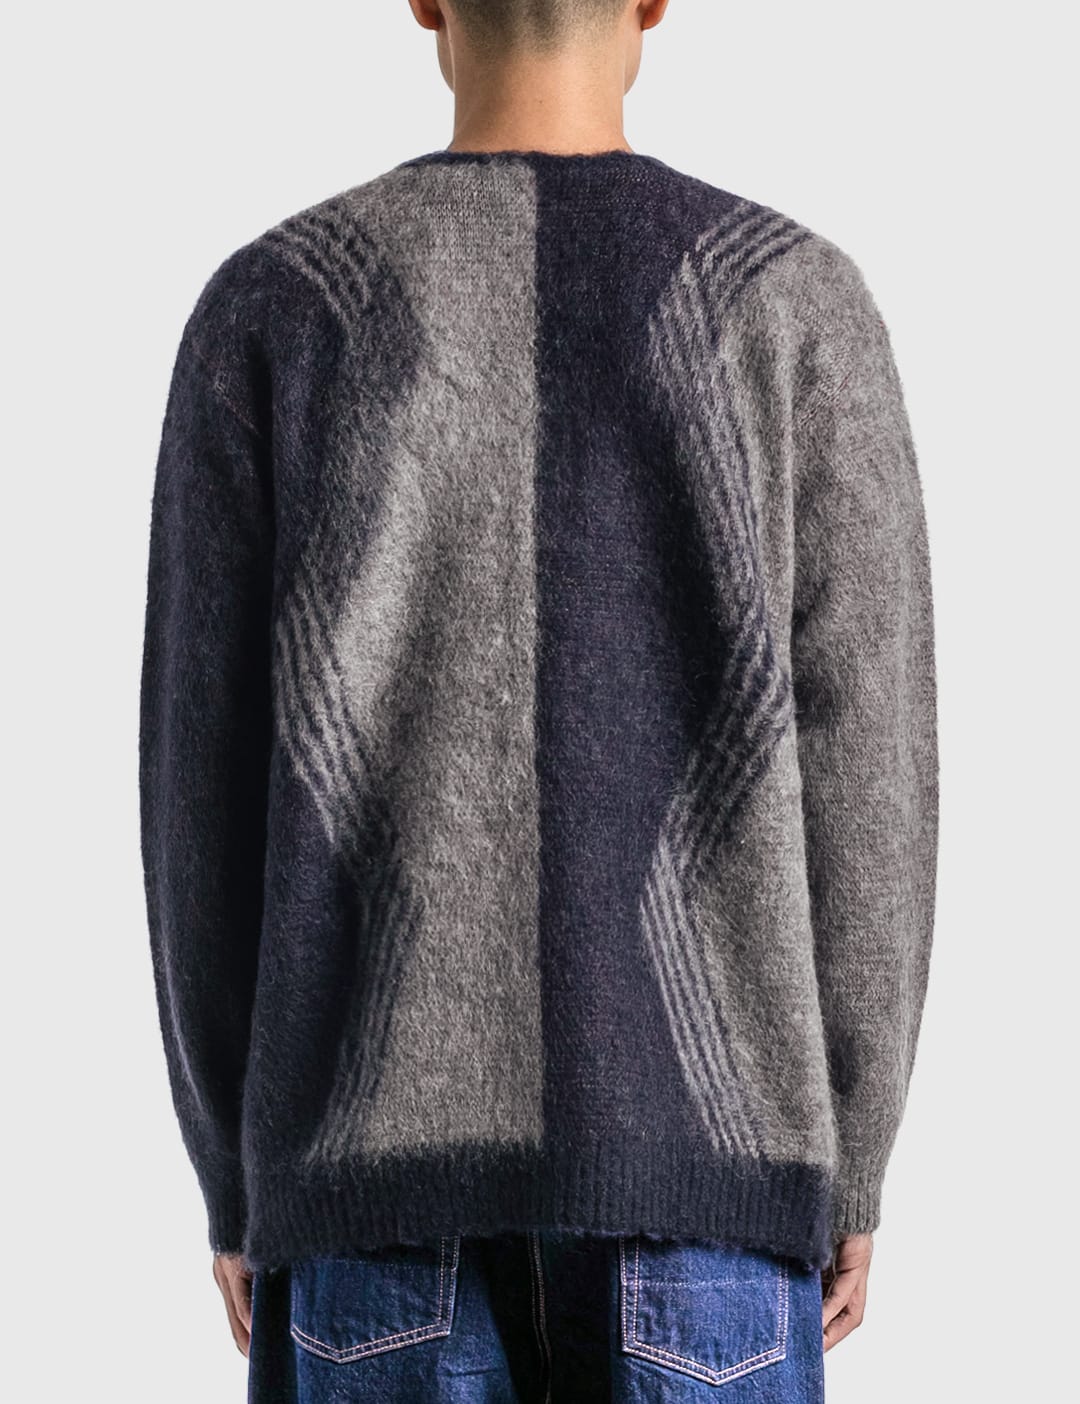 Needles - Mohair Cardigan | HBX - Globally Curated Fashion and 